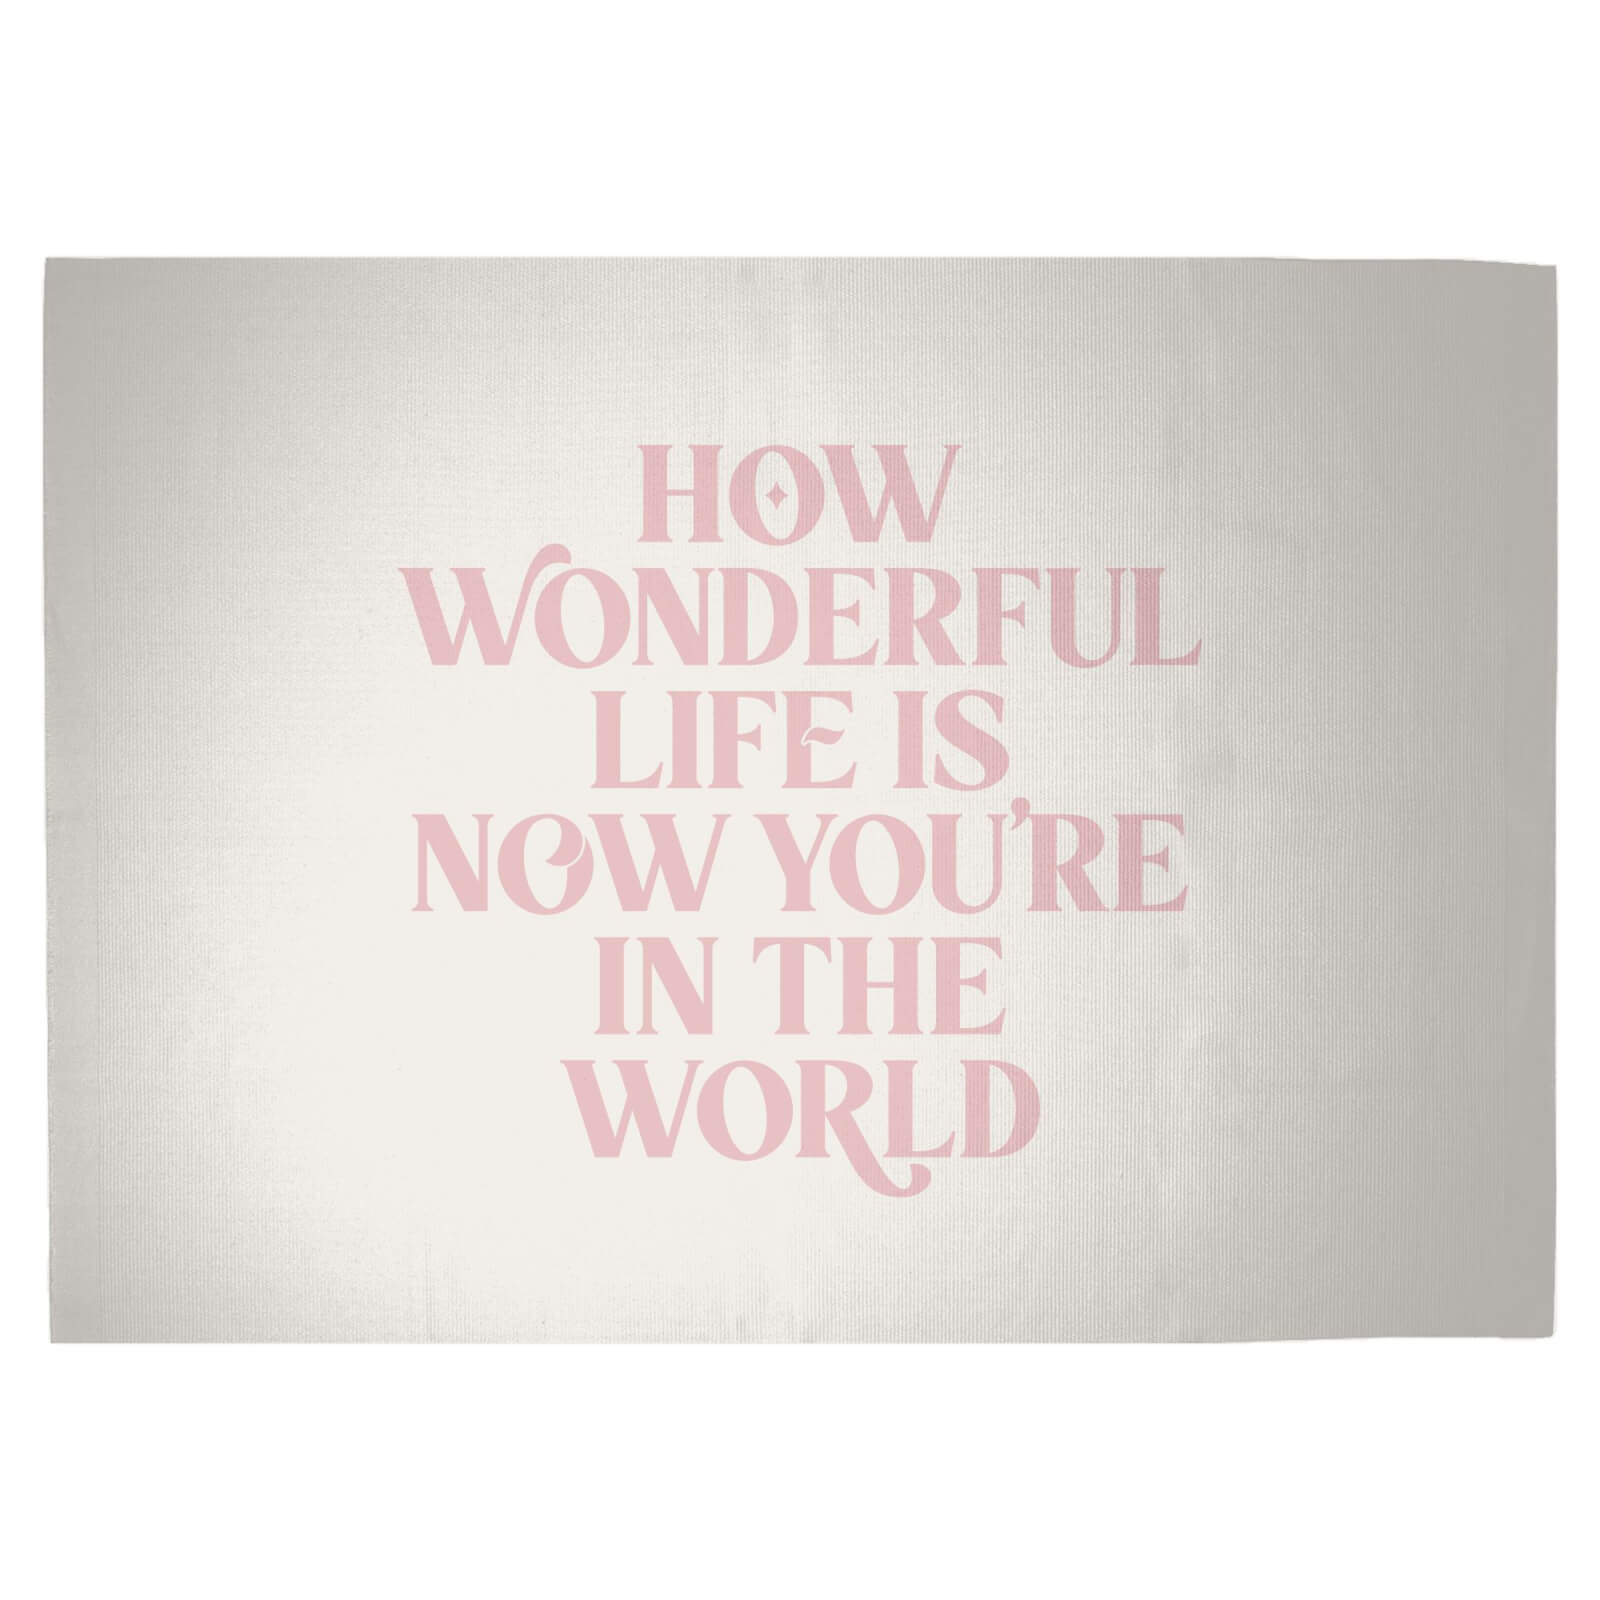 How Wonderful Life Is Now You're In The World Woven Rug - Large